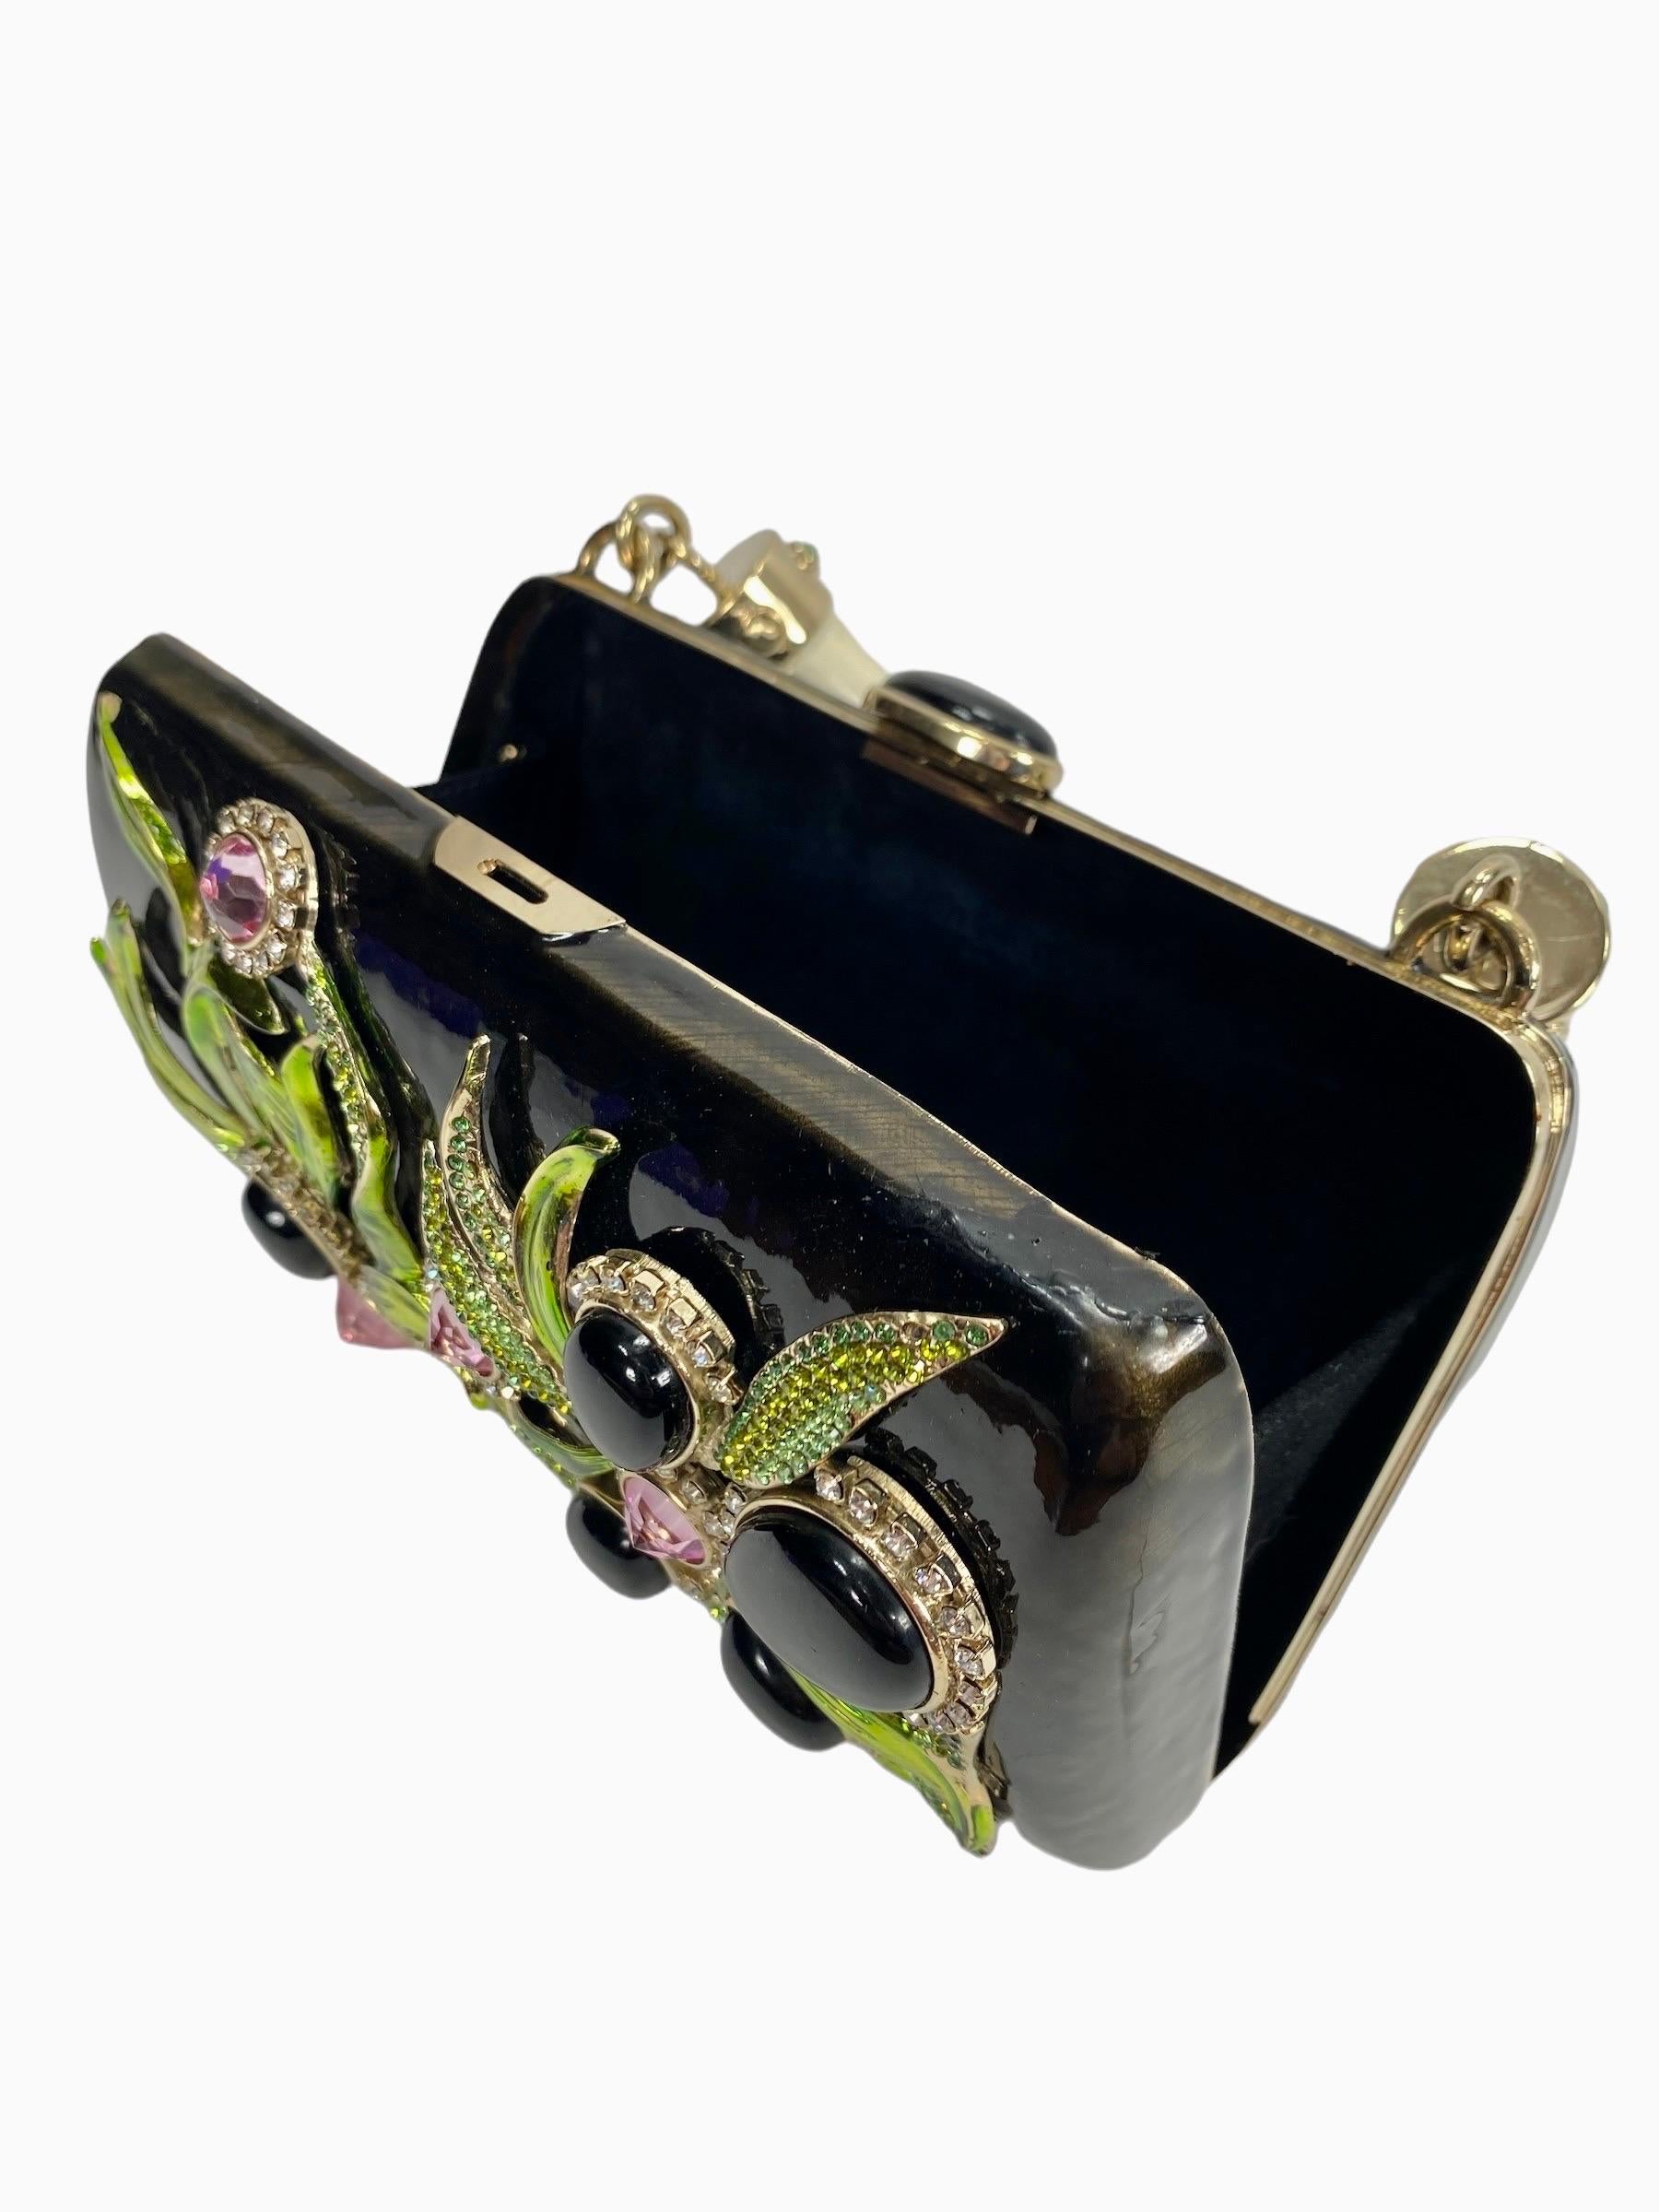 Tom Ford for Yves Saint Laurent Rive Gauche S/S 2004 Enamel Jeweled Clutch Bag For Sale 2